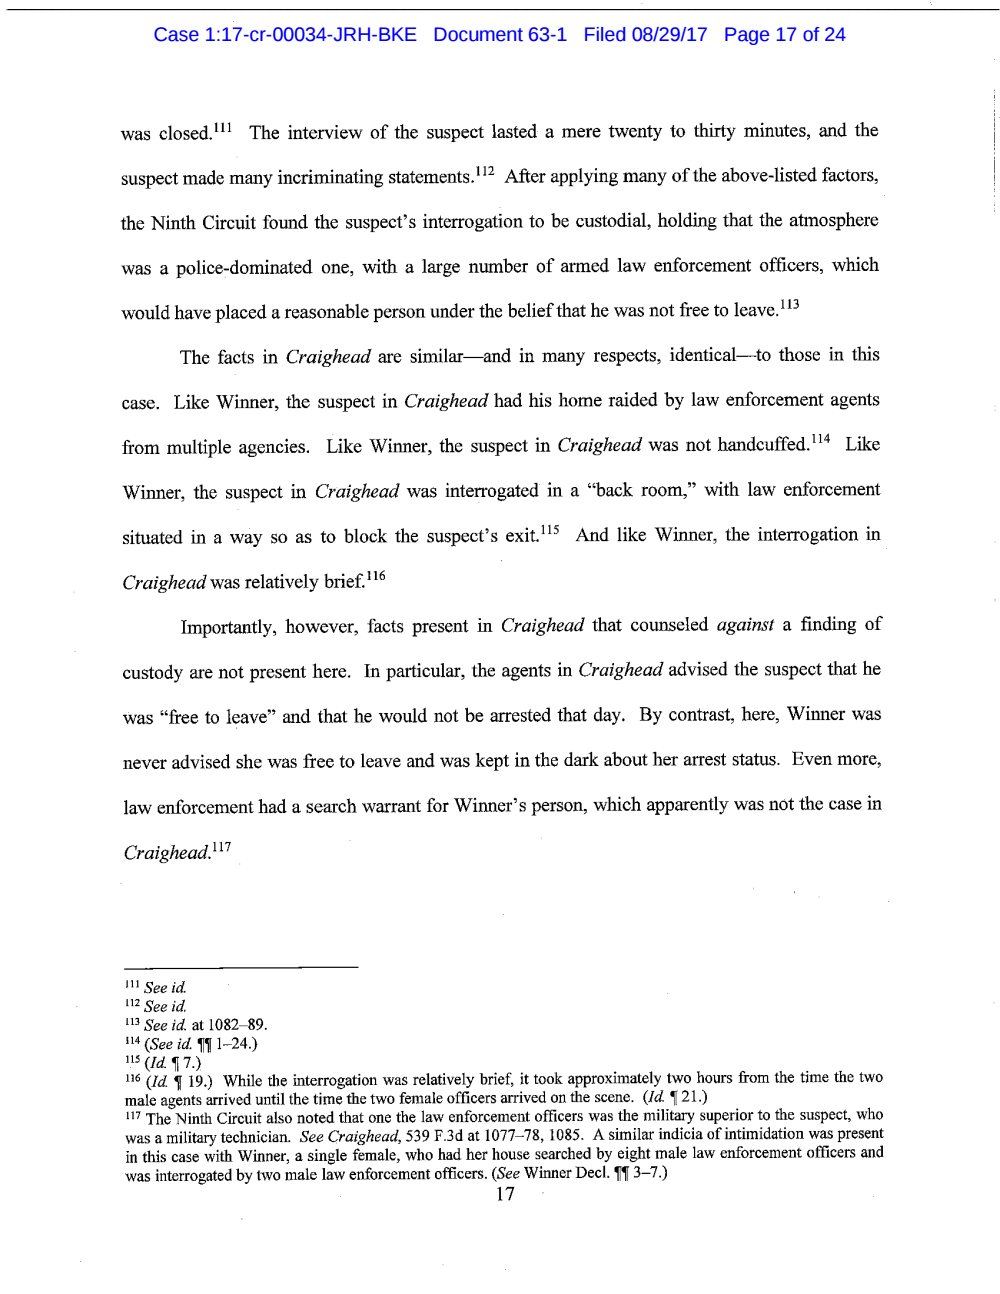 Page 17 from Reality Winner Memo in Support of Motion to Suppress